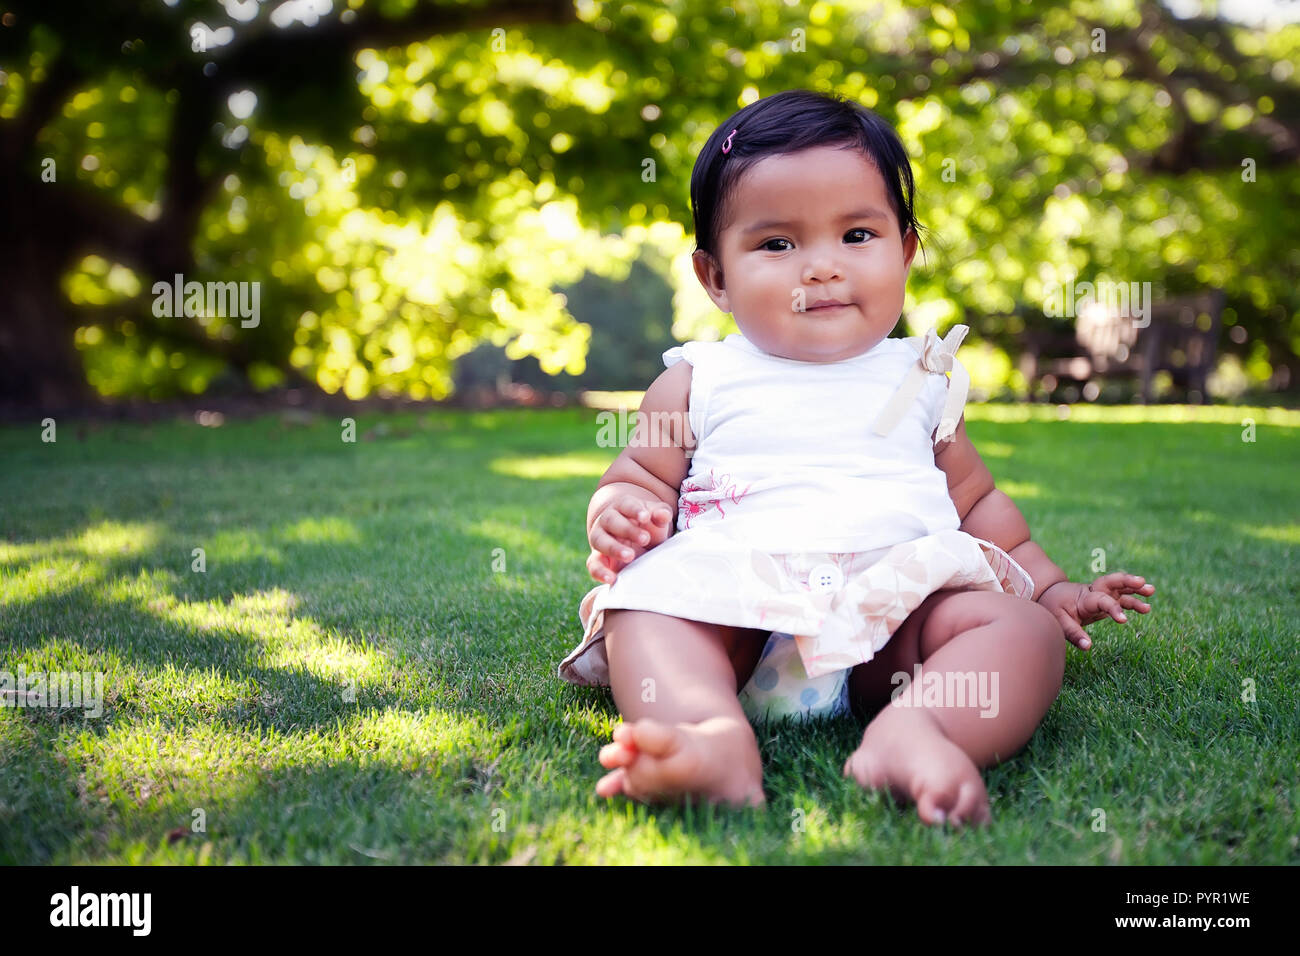 Baby mexican girl with cute smile, an unsupported sitter who has reached a developmental milestone, on a green lawn with beautiful trees. Stock Photo